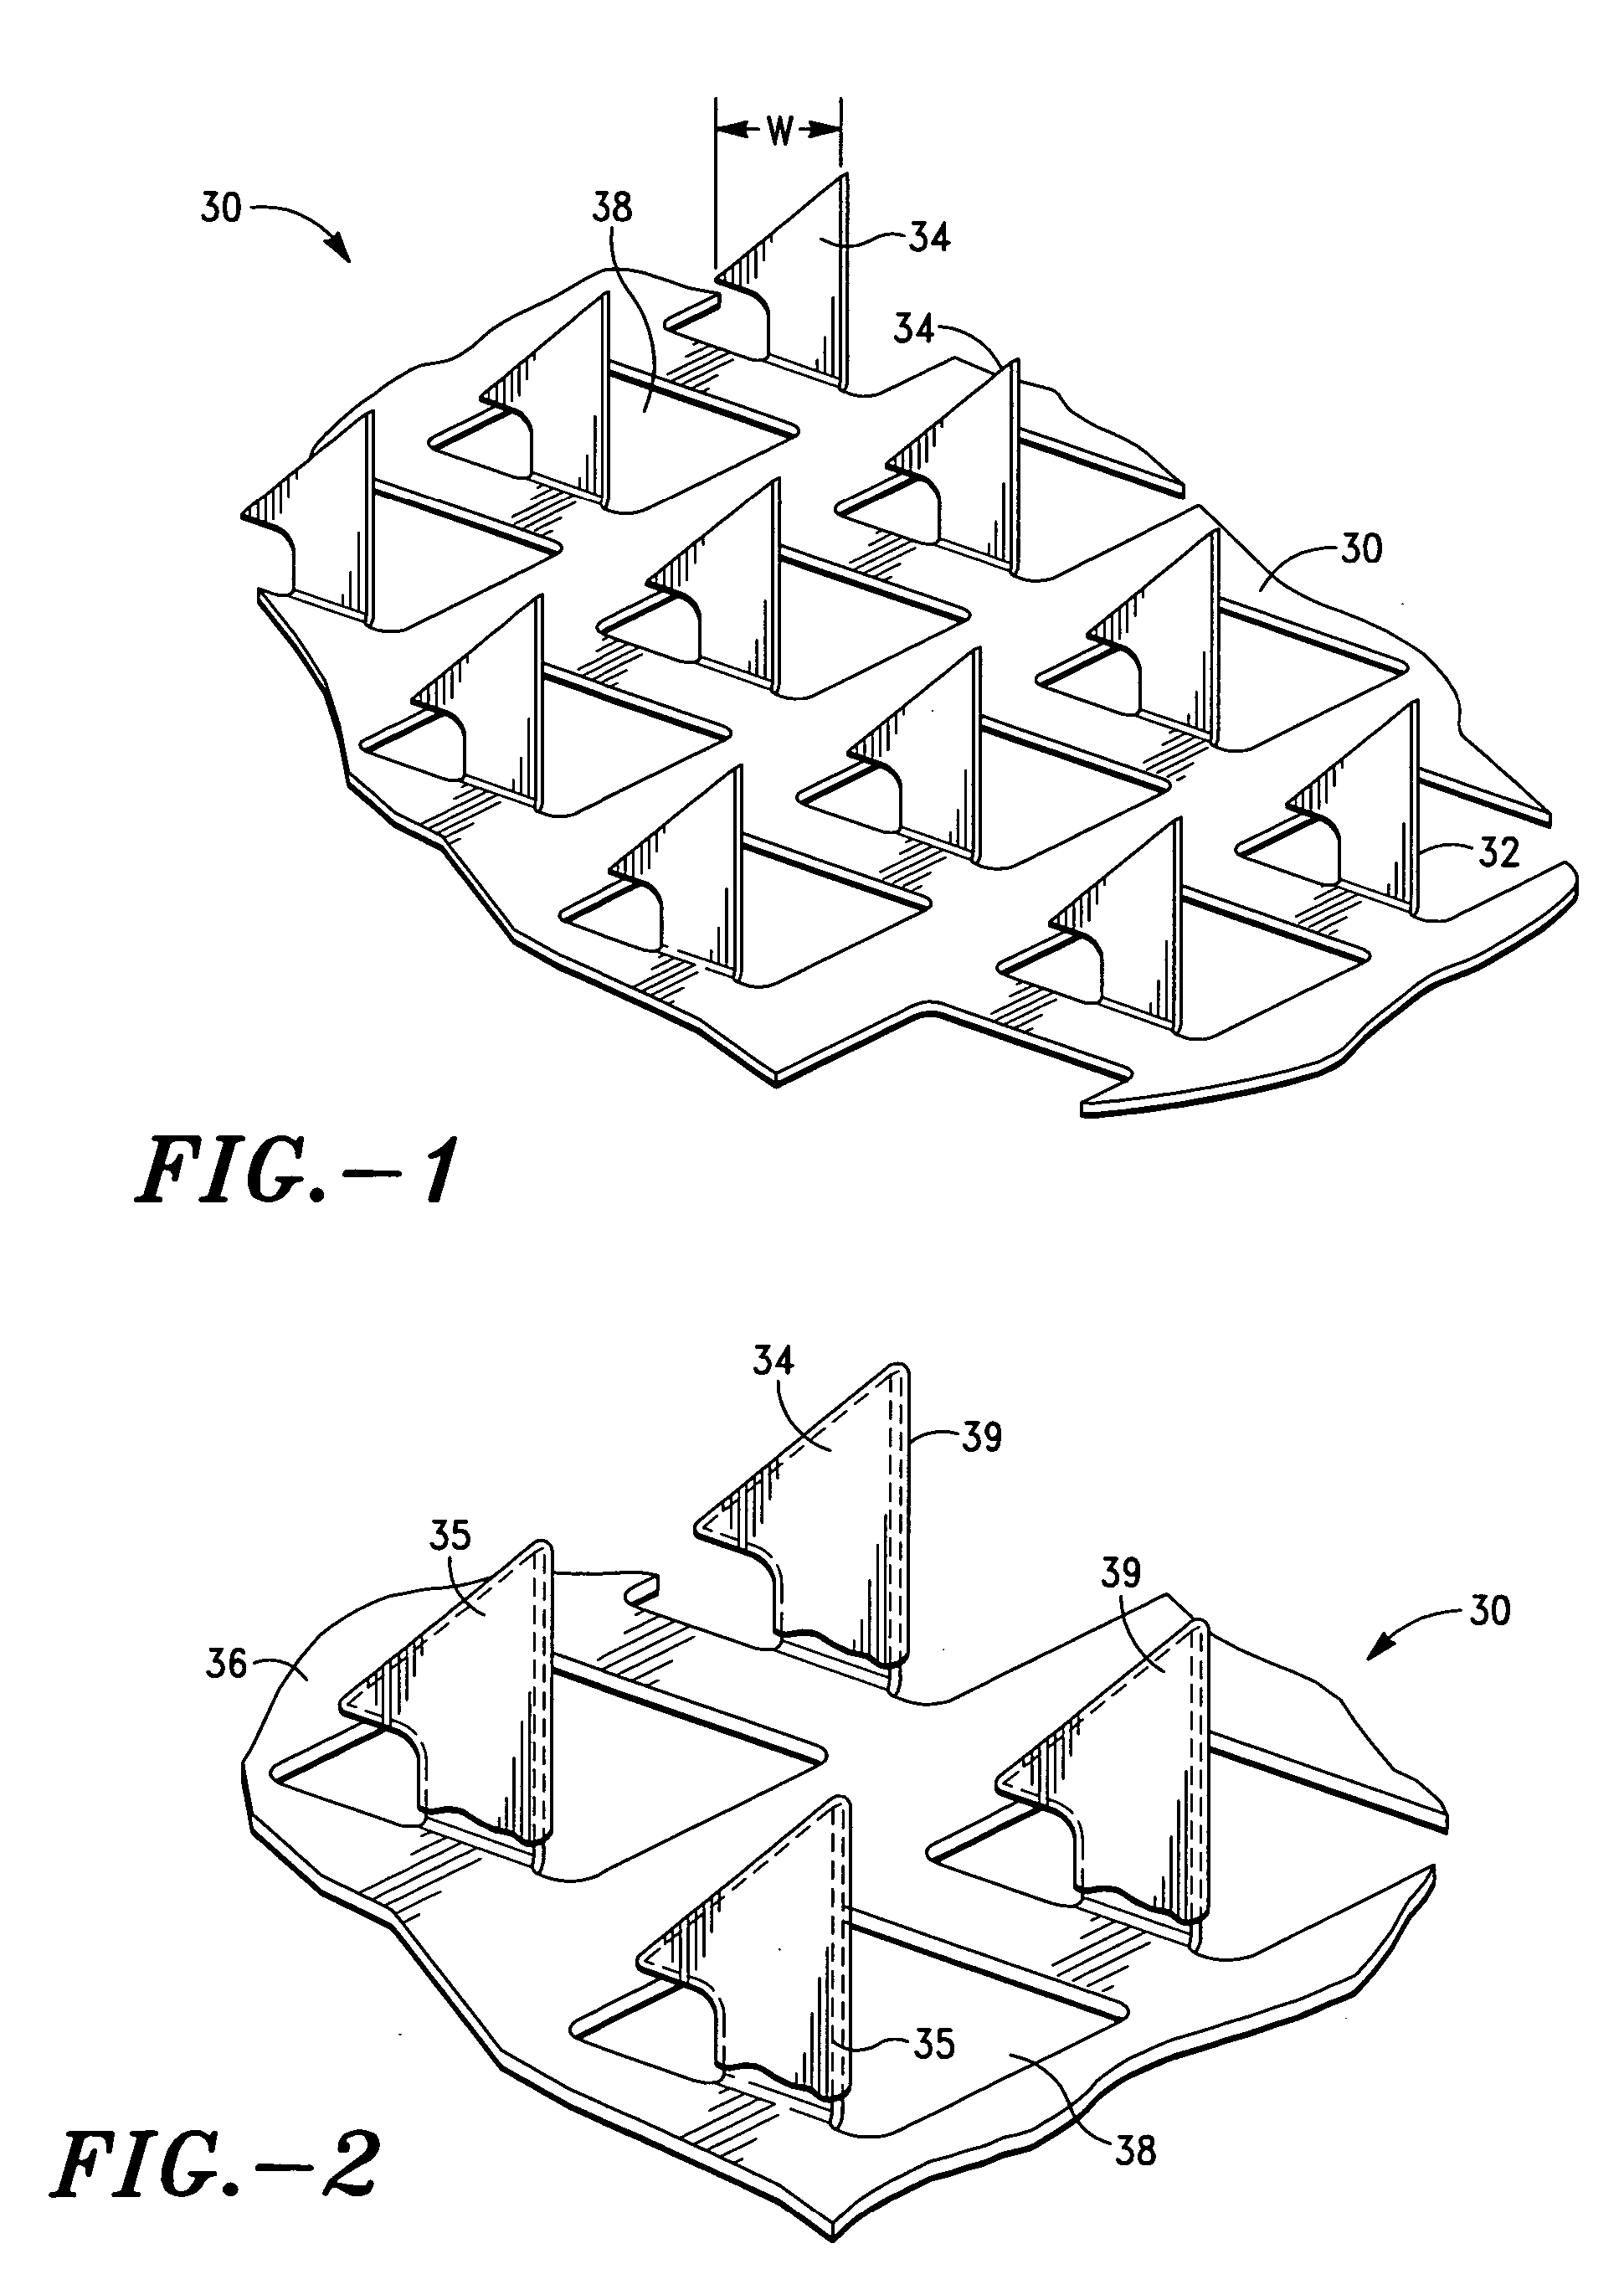 Apparatus and method for transdermal delivery of vascular endothelial growth factors